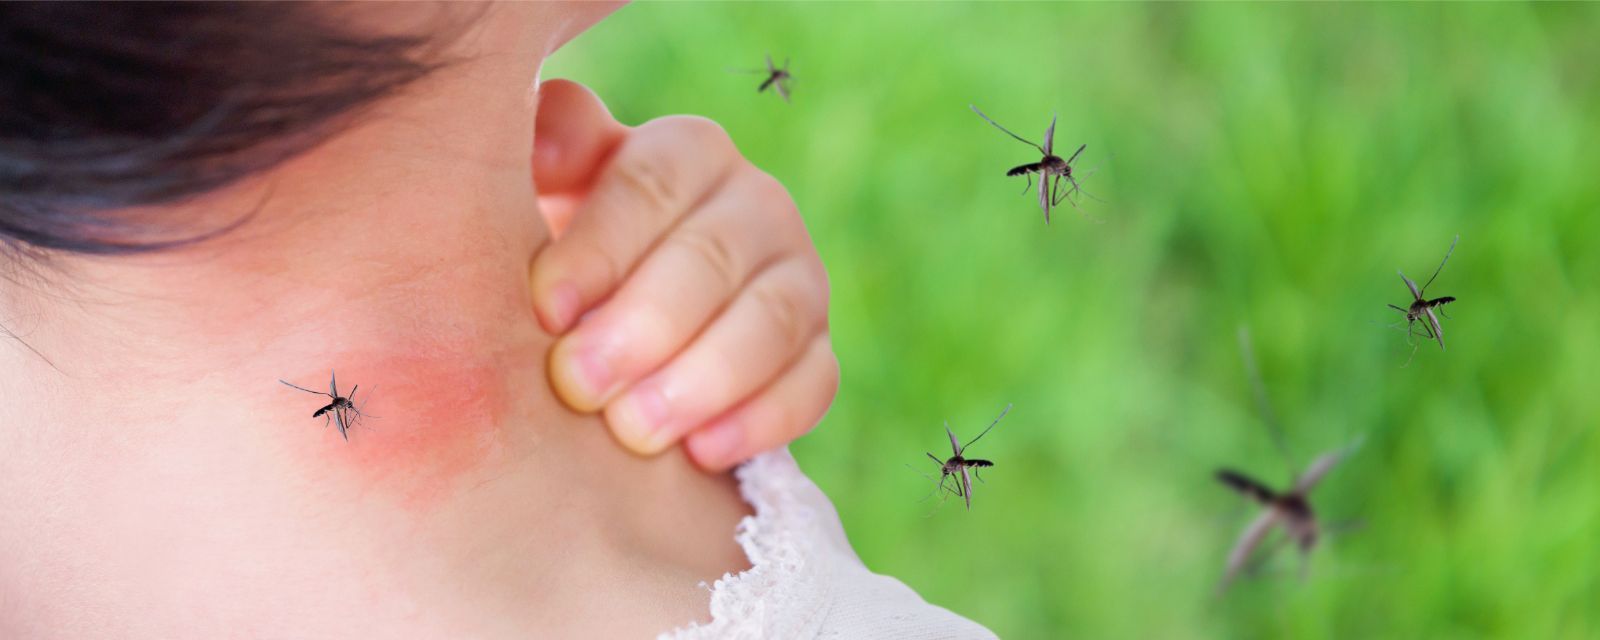 Tips for Mosquito Control in Homes Near Lexington, Kentucky (KY) like Contacting Pest Professionals 